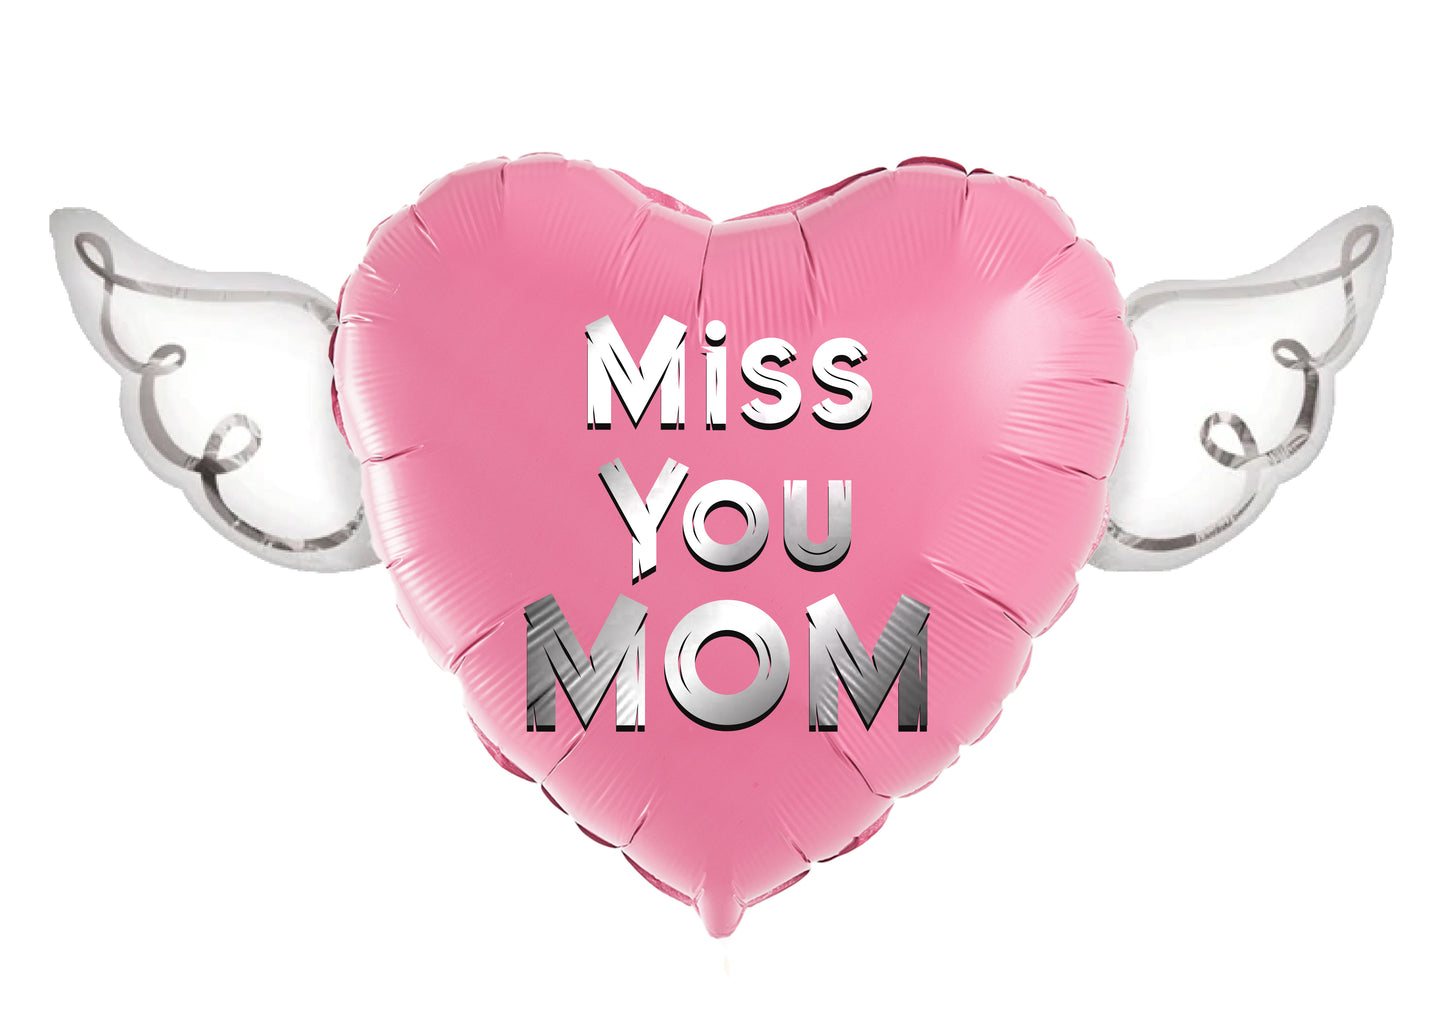 Miss You Mom Heavenly Balloons Heart Shaped with angel wings (Pink)